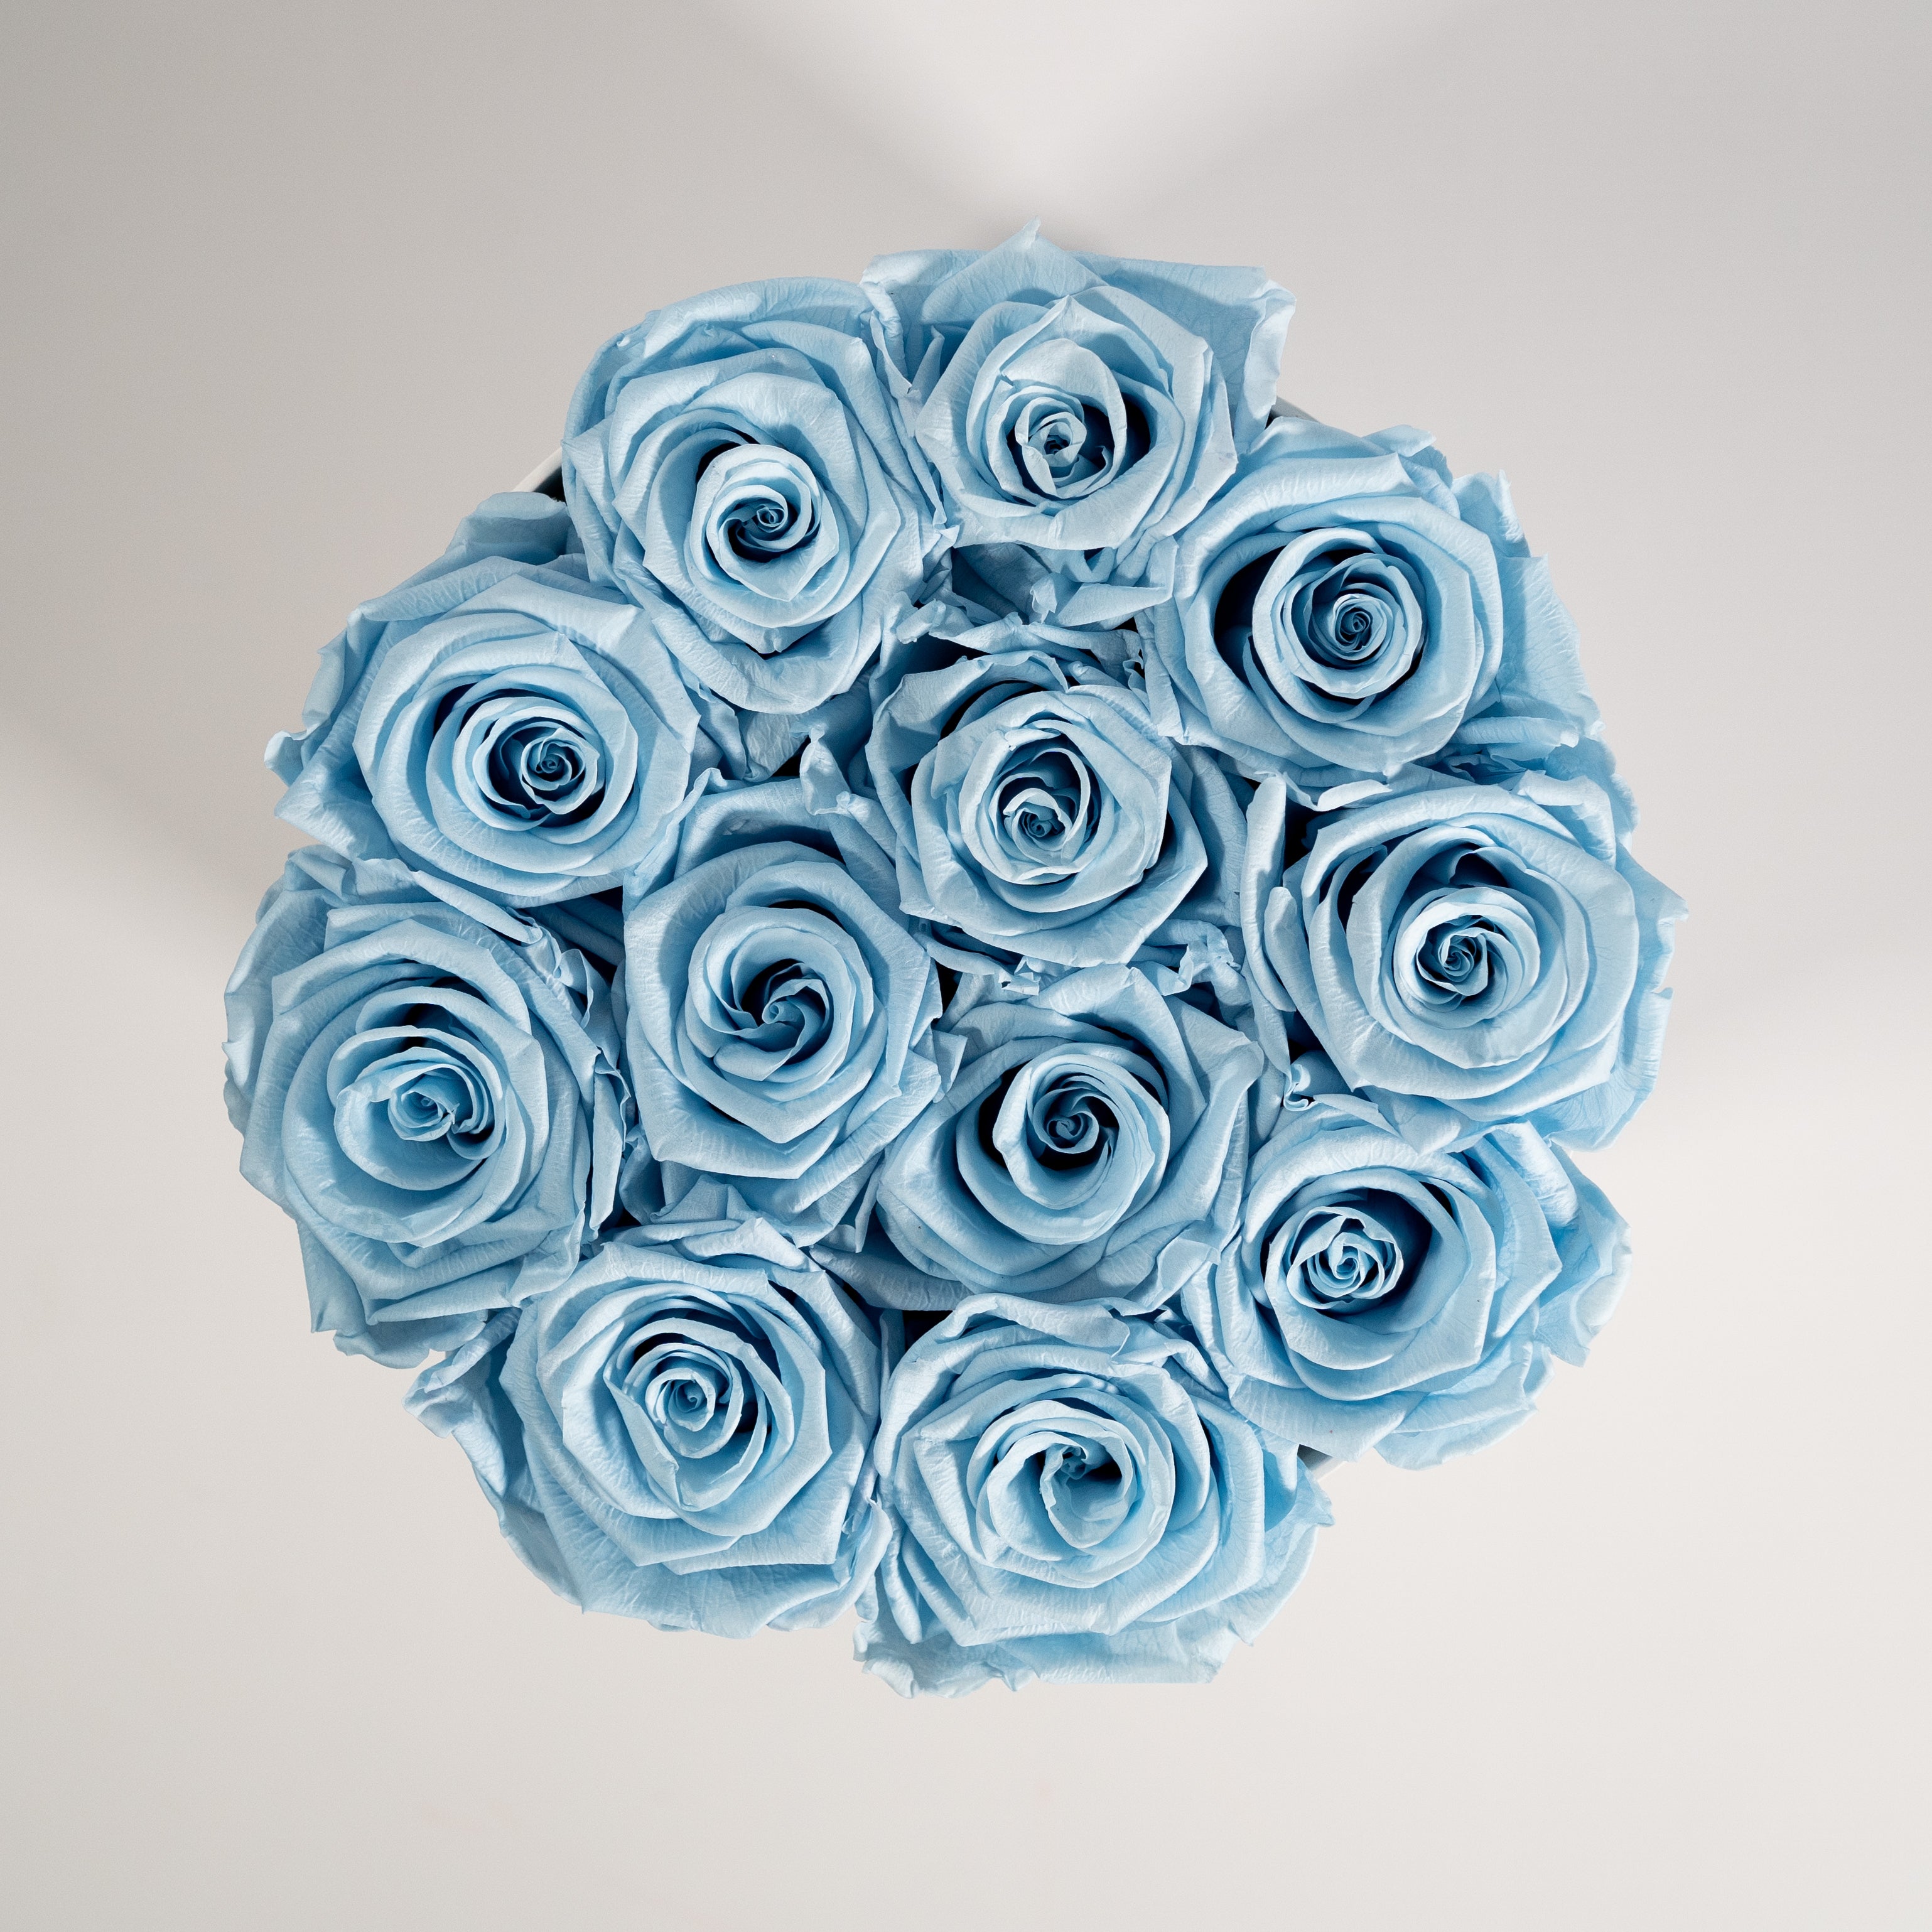 Dapper light blue Roses expressing protection and healing. 